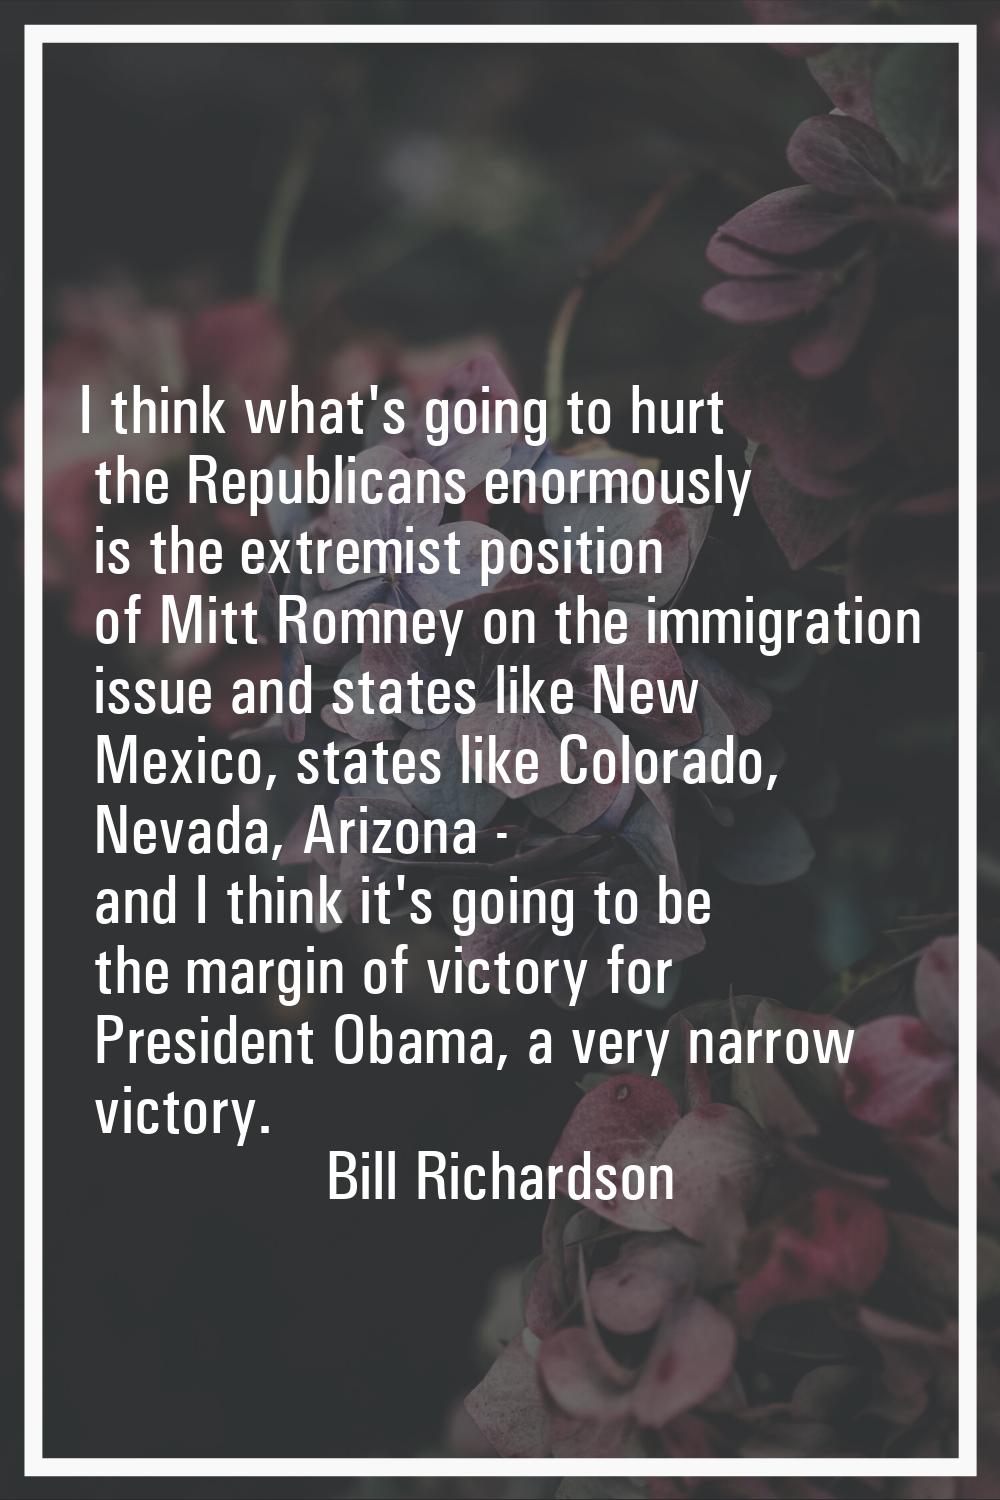 I think what's going to hurt the Republicans enormously is the extremist position of Mitt Romney on